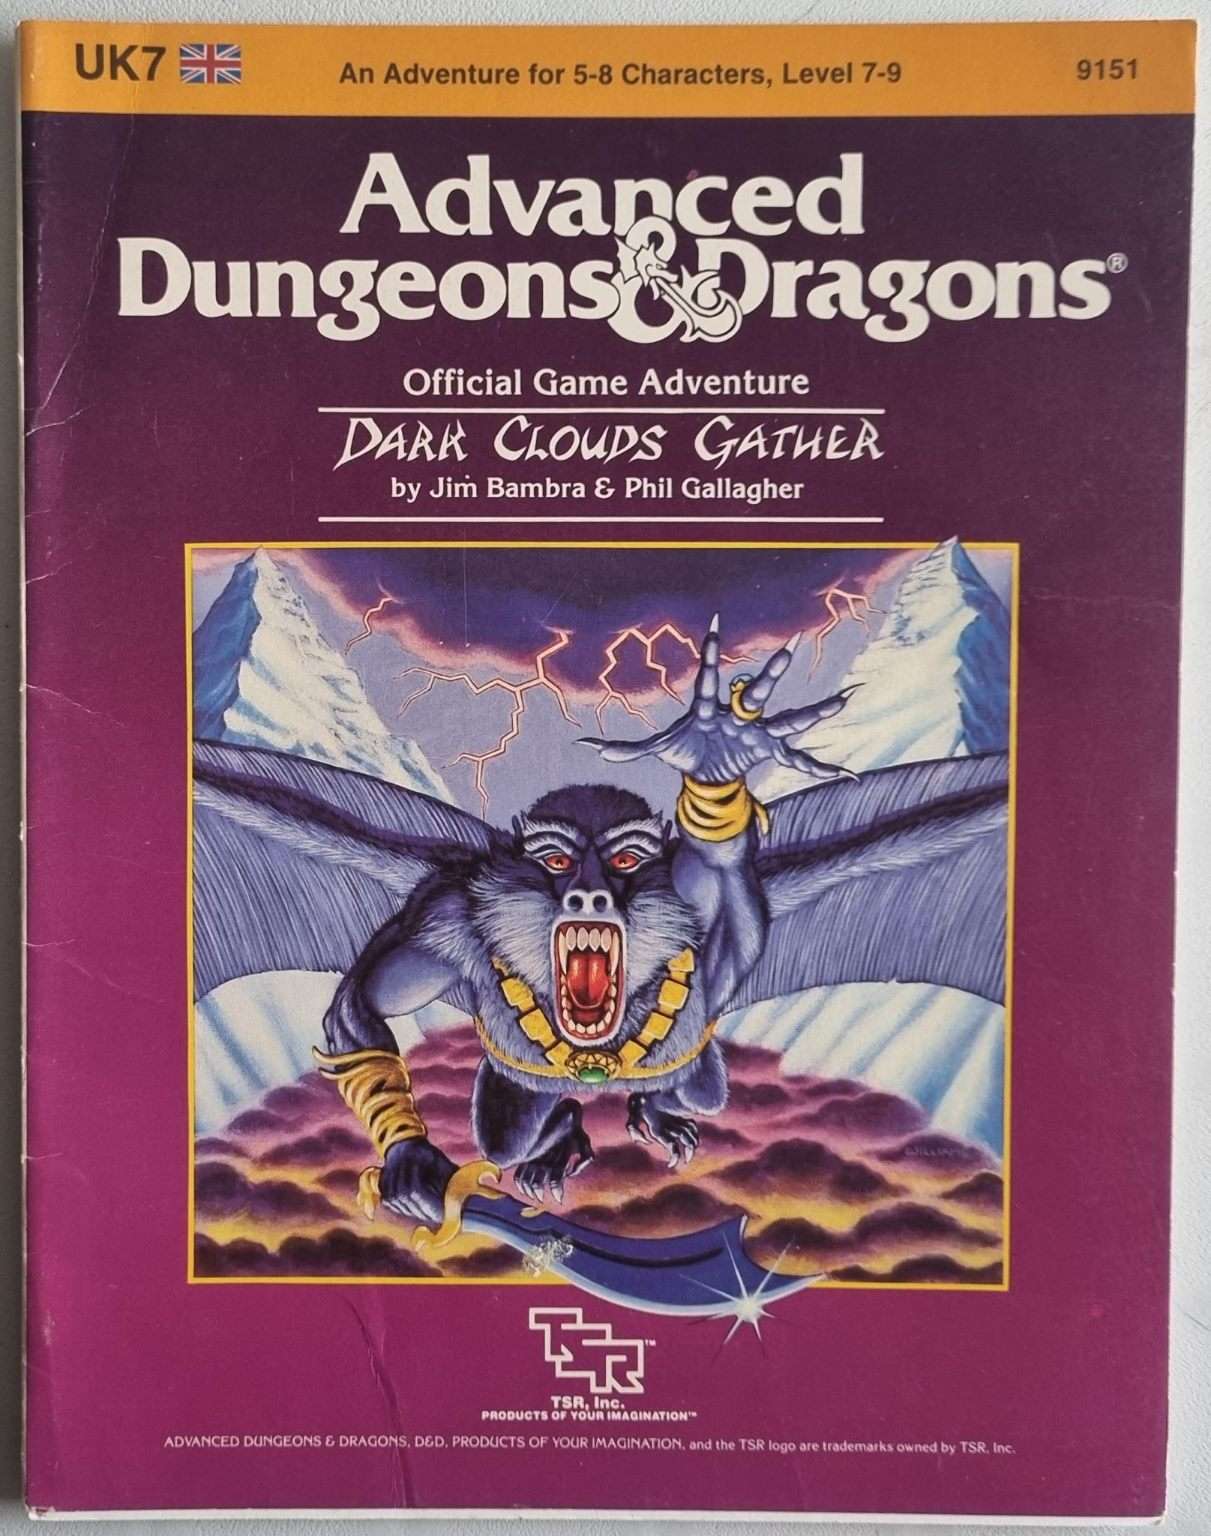 Advanced Dungeons and Dragons - Dark Clouds Gather (UK7 9151) Default Title